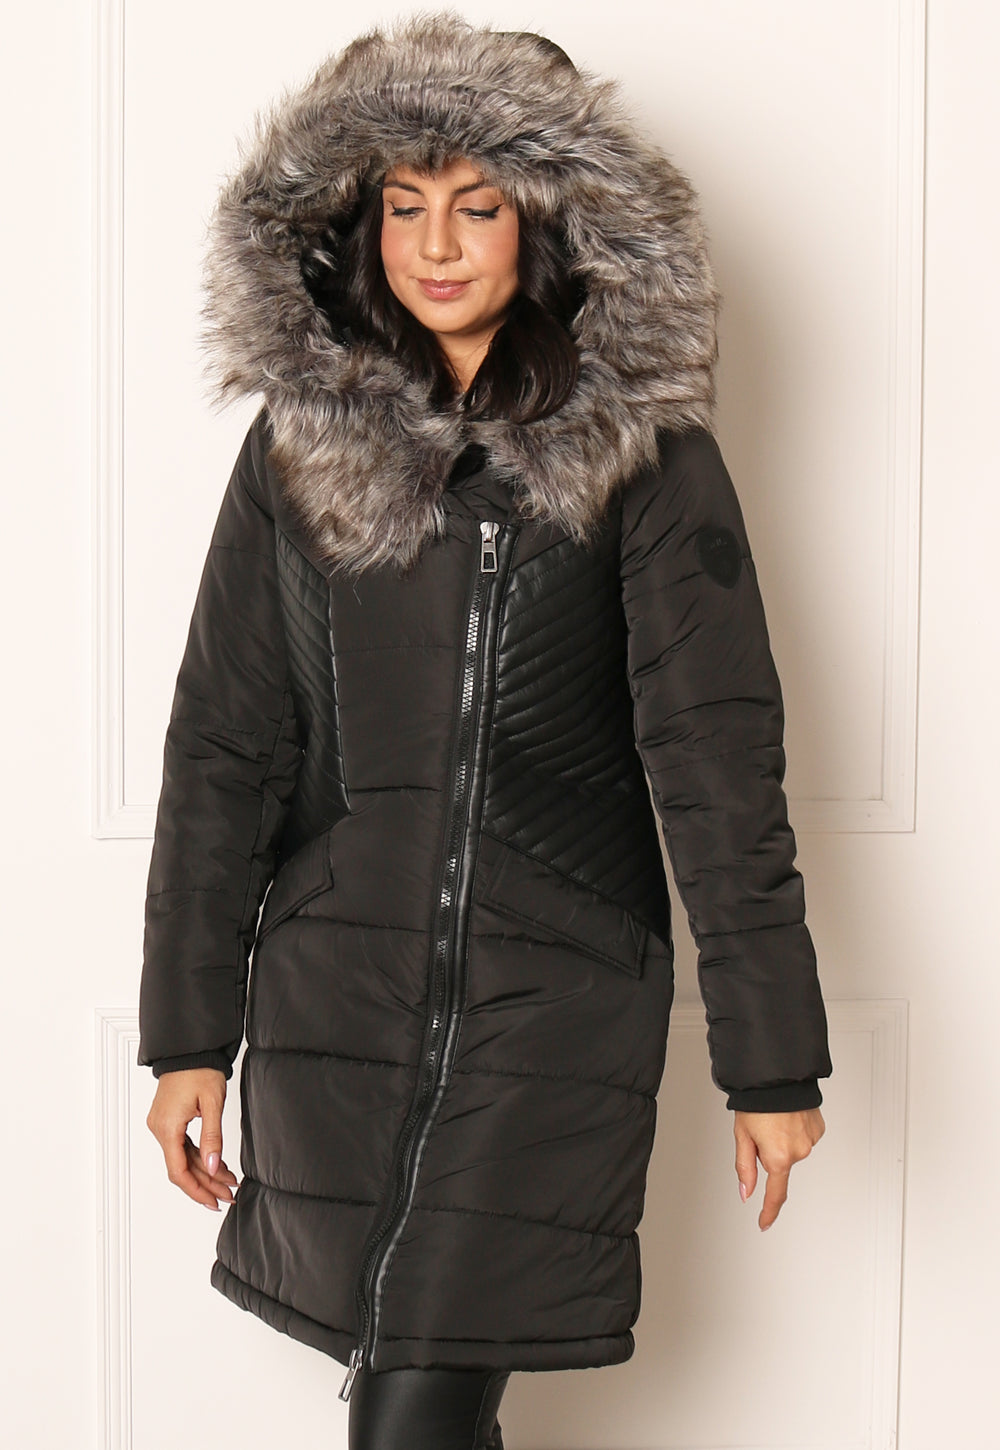 ONLY Litta Longline Biker Detail Coat with Leather Detail & Fur Trim in Black & Grey - One Nation Clothing